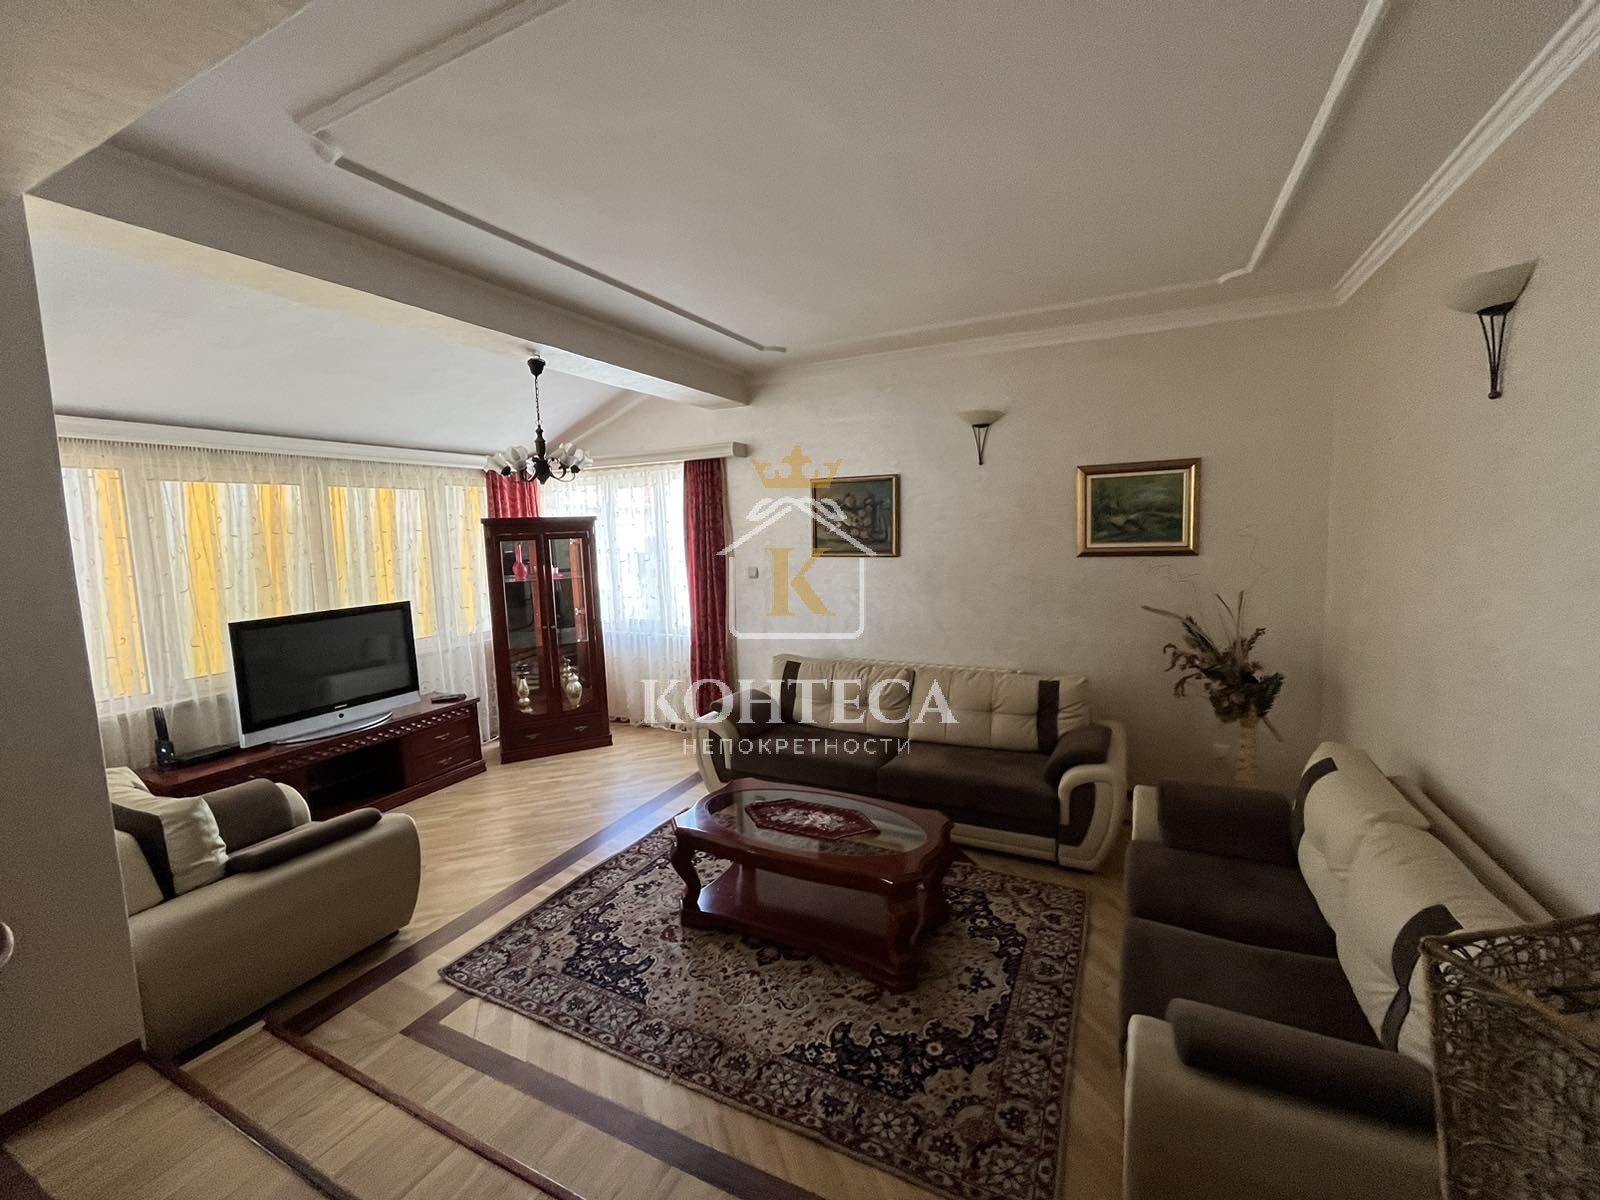 Four bedroom apartment near center of Tivat